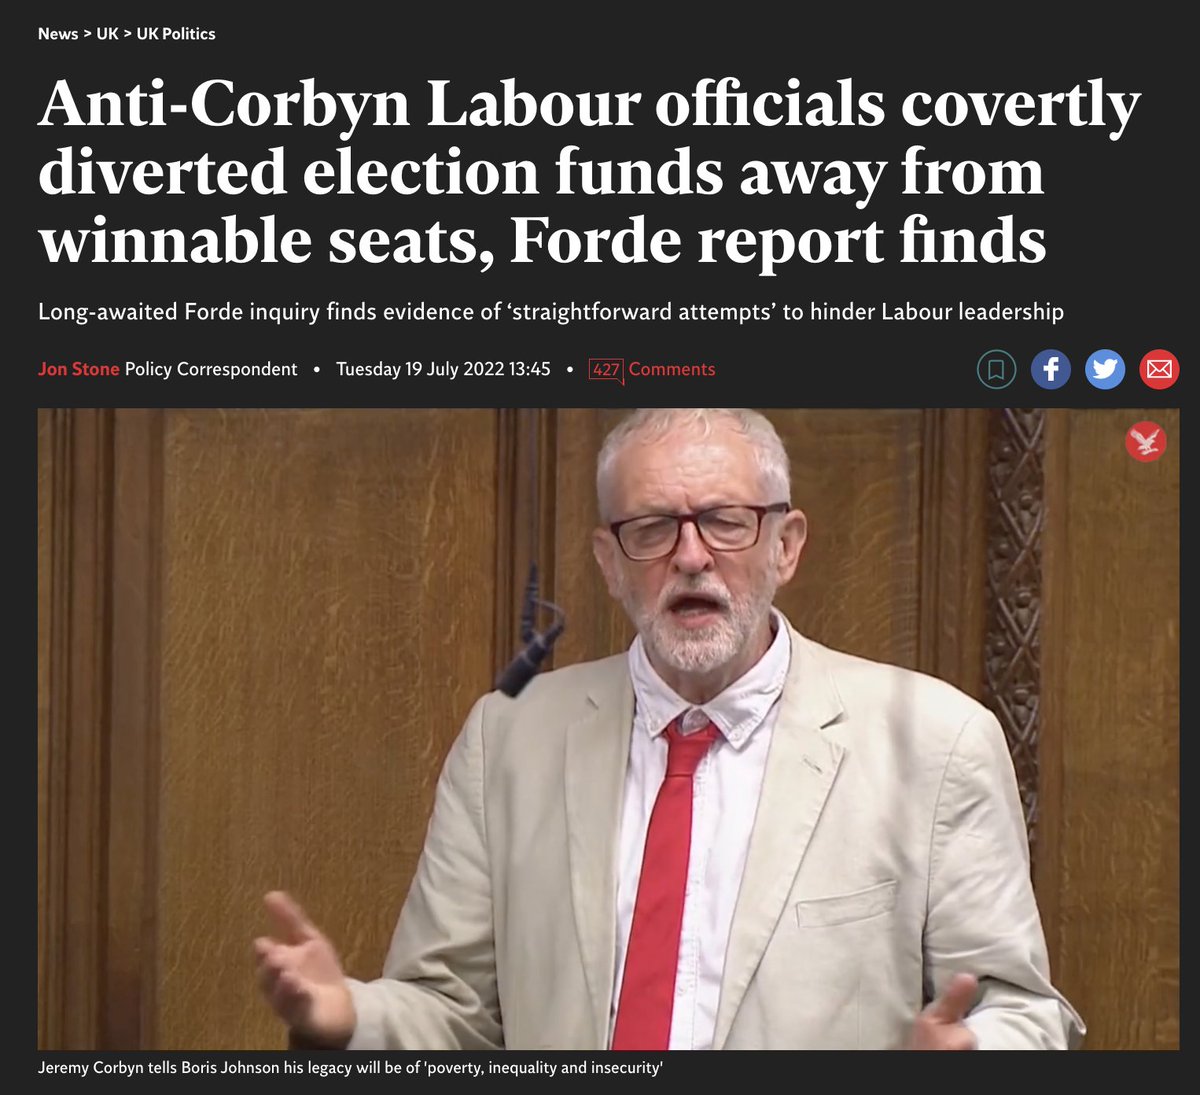 Literally no acknowledgement of the fact that Labour party staffers actively worked against a party victory in 2017.

Which I guess is impossible to contextualise when you're comfortable denying reality.